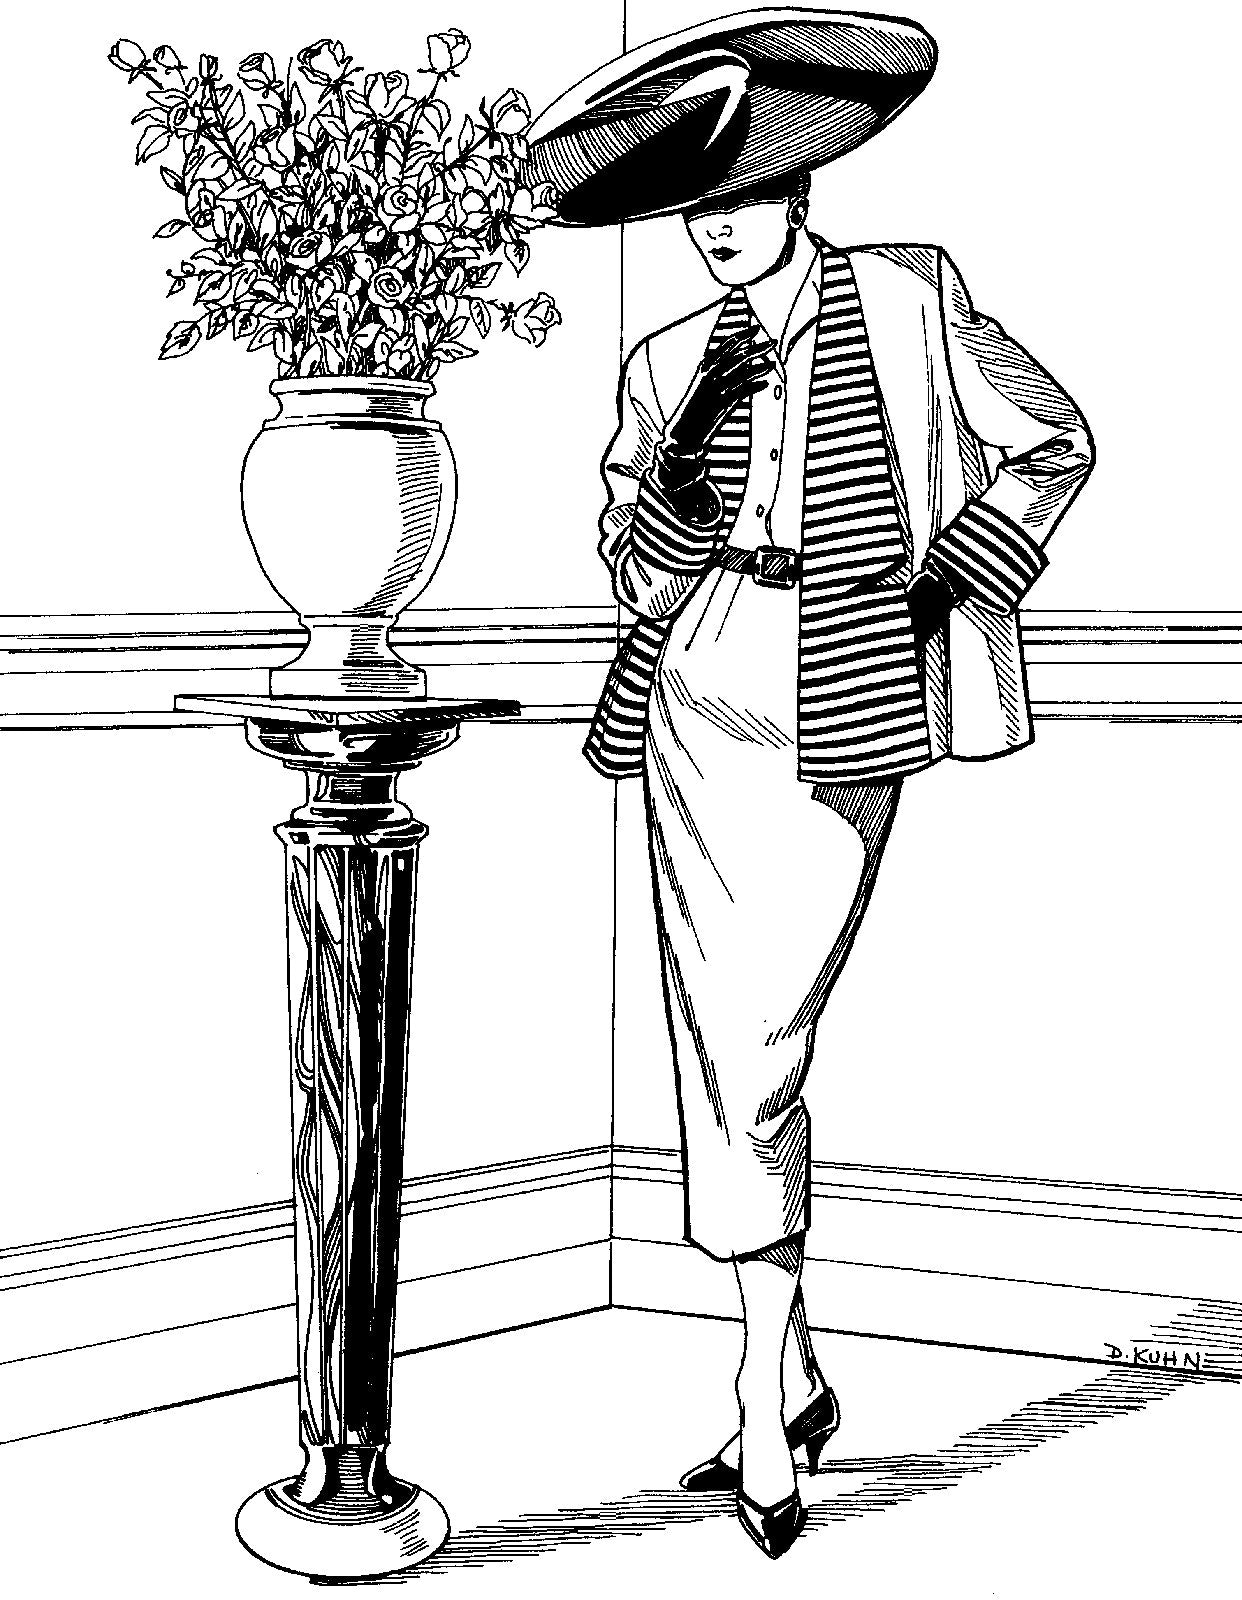 Black and white pen and ink drawing by artist Gretchen Shields. Woman standing next to a podium with a vase full of flowers wearing #255 Swing Suit with a hat.